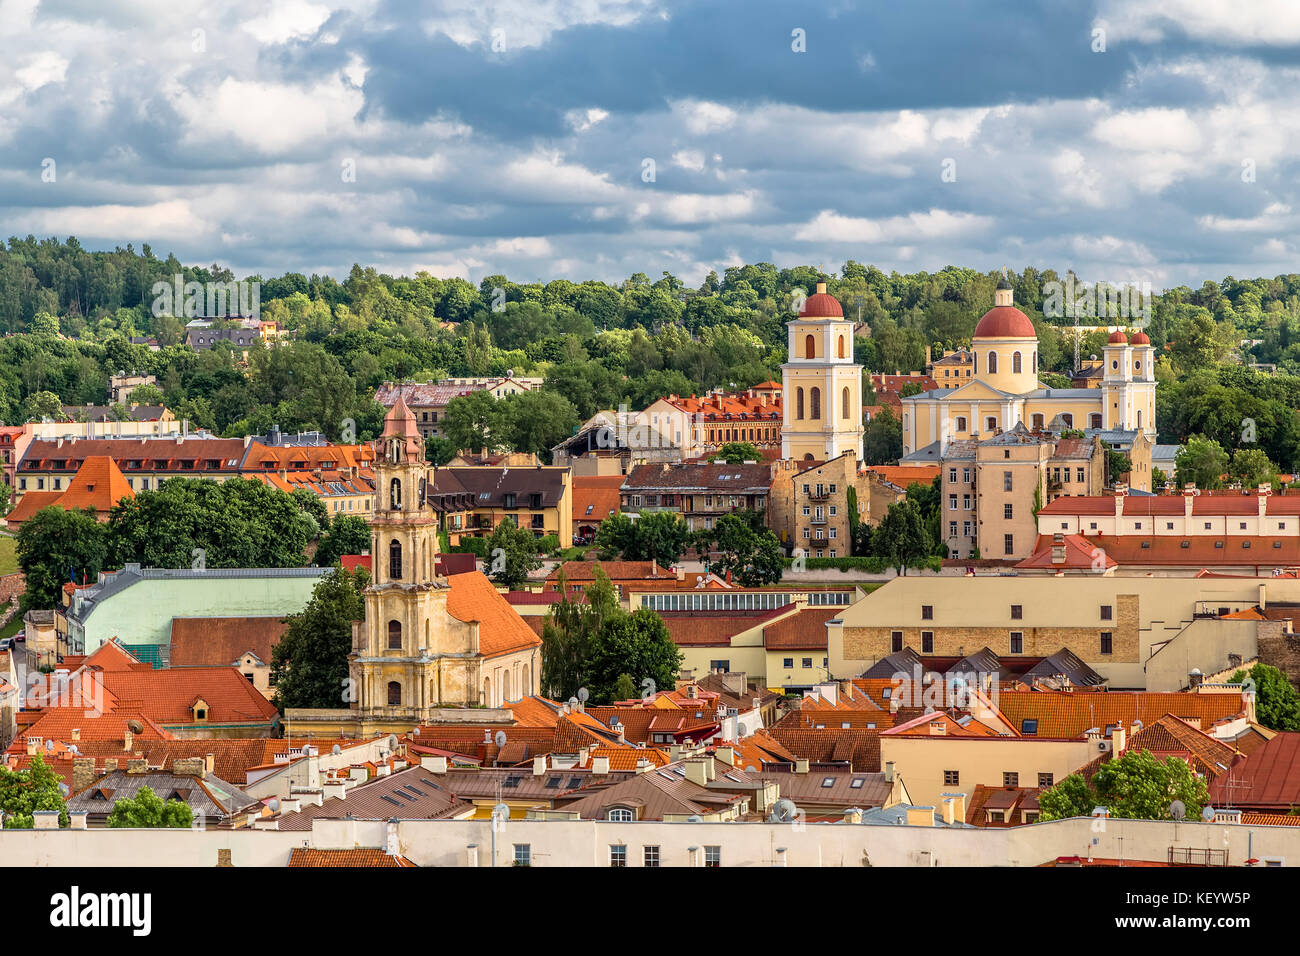 View of the Old Town. Vilnius. Lithuania. Stock Photo